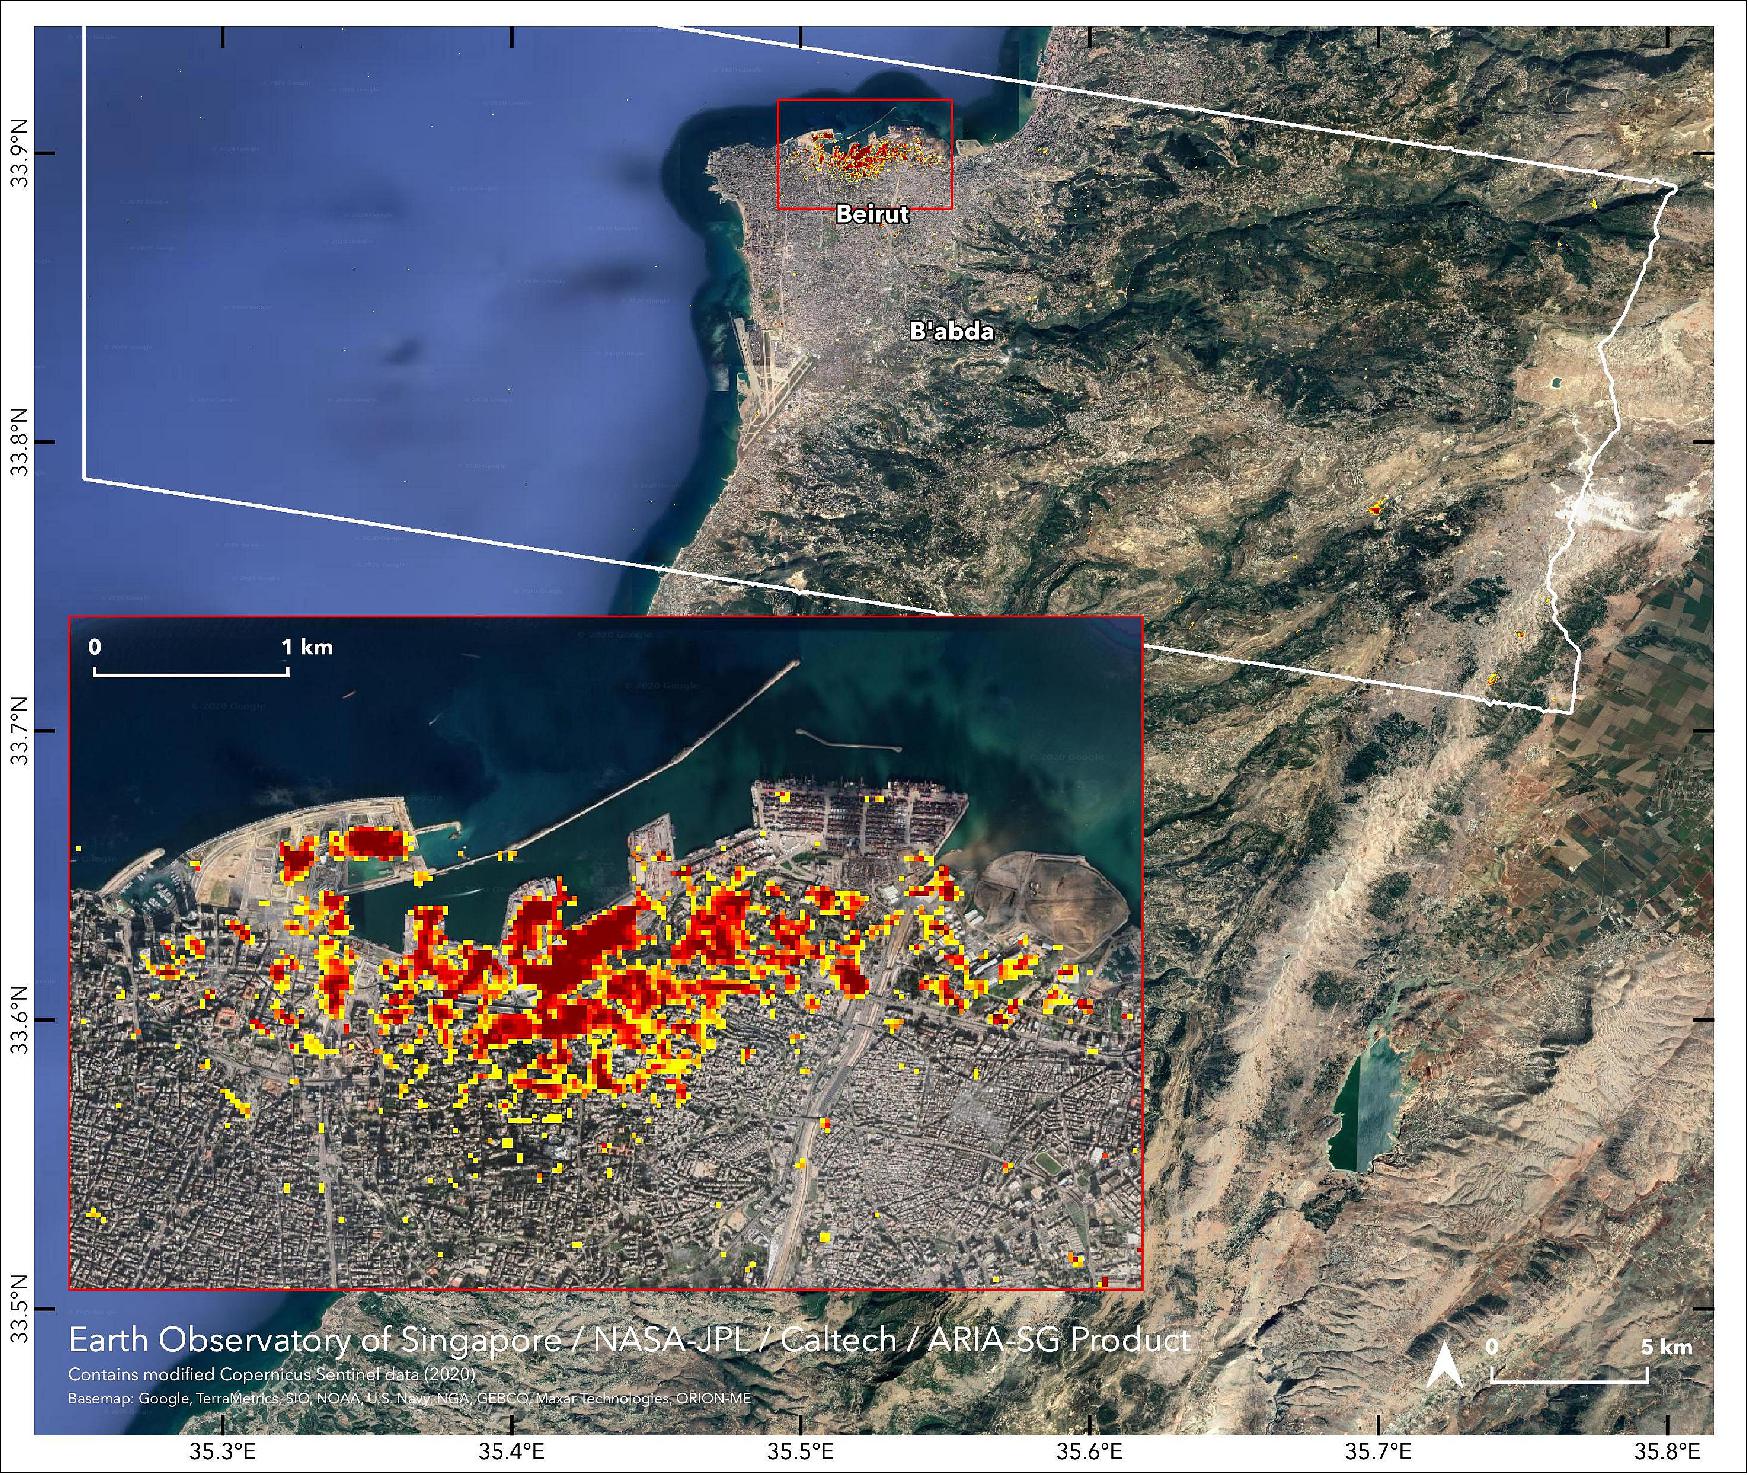 Figure 13: The map contains modified Copernicus Sentinel-1 data processed by ESA (European Space Agency) and analyzed by ARIA team scientists at NASA's Jet Propulsion Laboratory, Caltech, and Earth Observatory of Singapore. Based in Pasadena, California, Caltech manages JPL for NASA. The ARIA team used satellite data to map the extent of likely damage following a massive explosion in Beirut. Dark red pixels represent the most severe damage. Areas in orange are moderately damaged, and areas in yellow are likely to have sustained somewhat less damage. Each colored pixel represents an area of 30 meters (image credit: NASA/JPL-Caltech/Earth Observatory of Singapore/ESA)